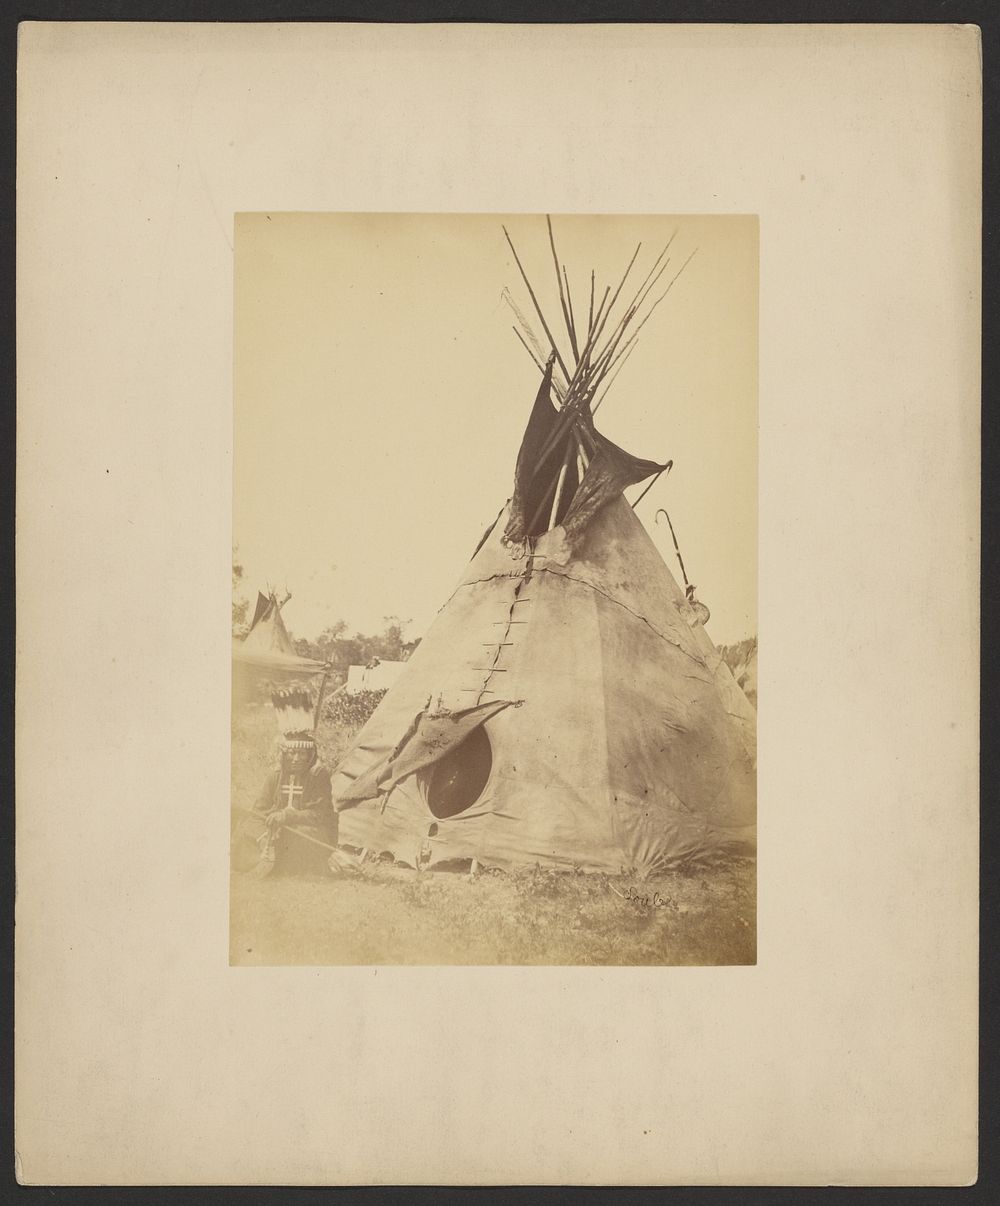 Little Big Mouth and Teepee, near Fort Sill. Possibly a Cheyenne Camp by William Stinson Soule